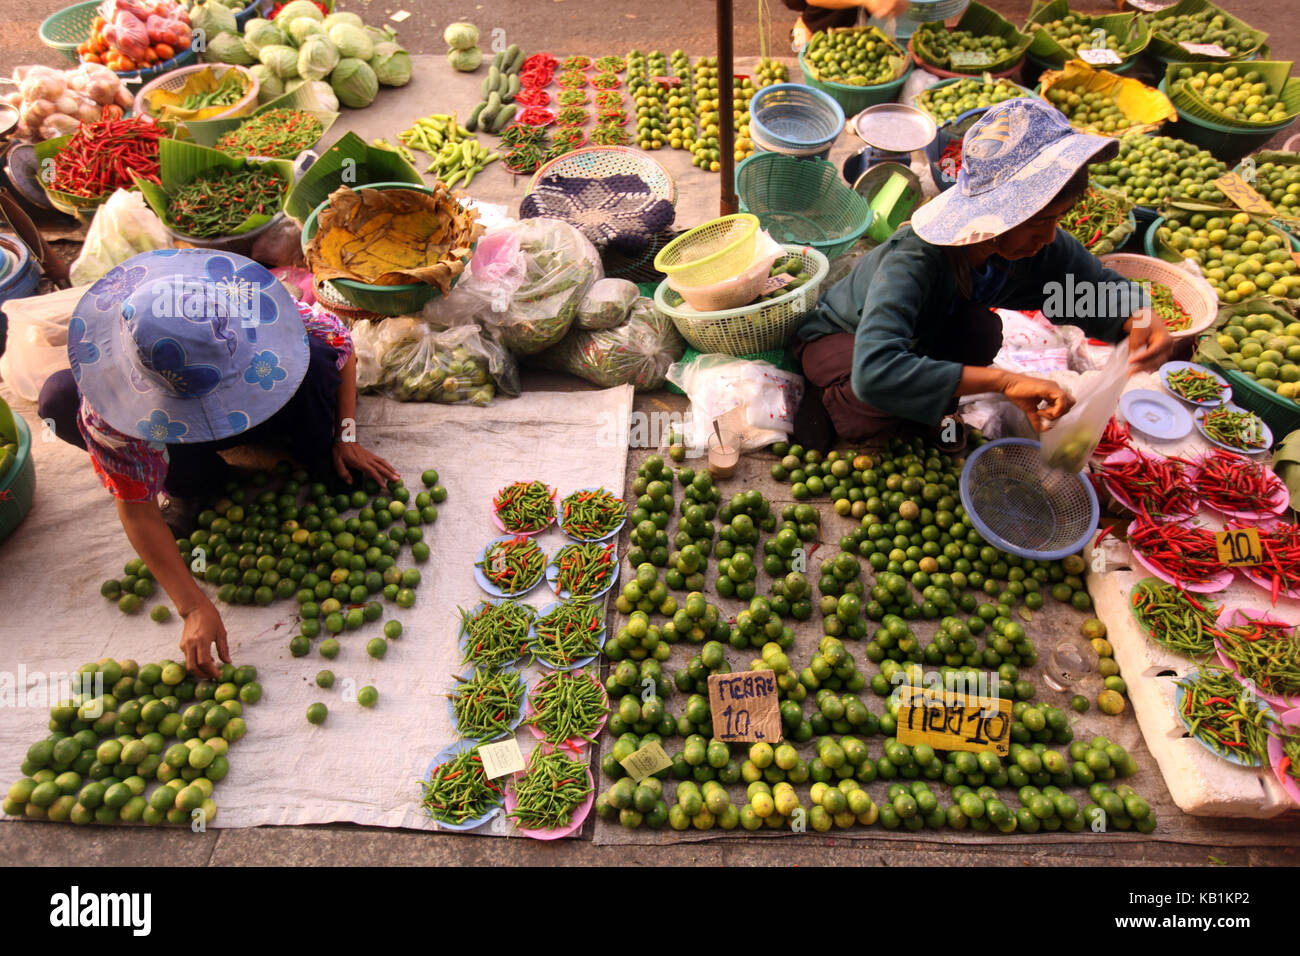 Asia, South-East Asia, Thailand, Chiang Rai, Old Town, market, agriculture, Stock Photo